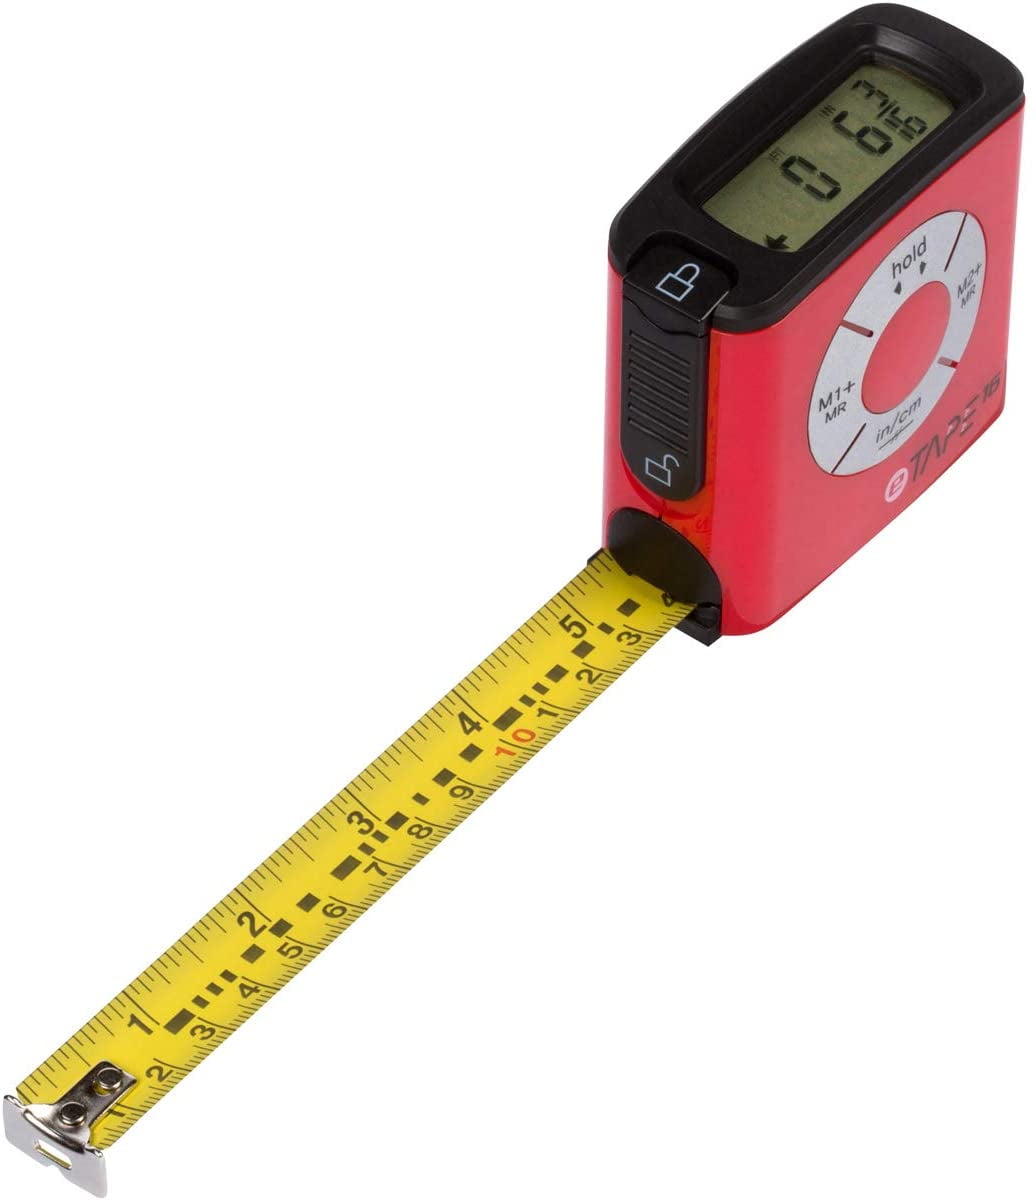 Small Air Conditioner Children's Tape Measure Toys Tapeline Kids Learning  Plastic Double Sided Ruler